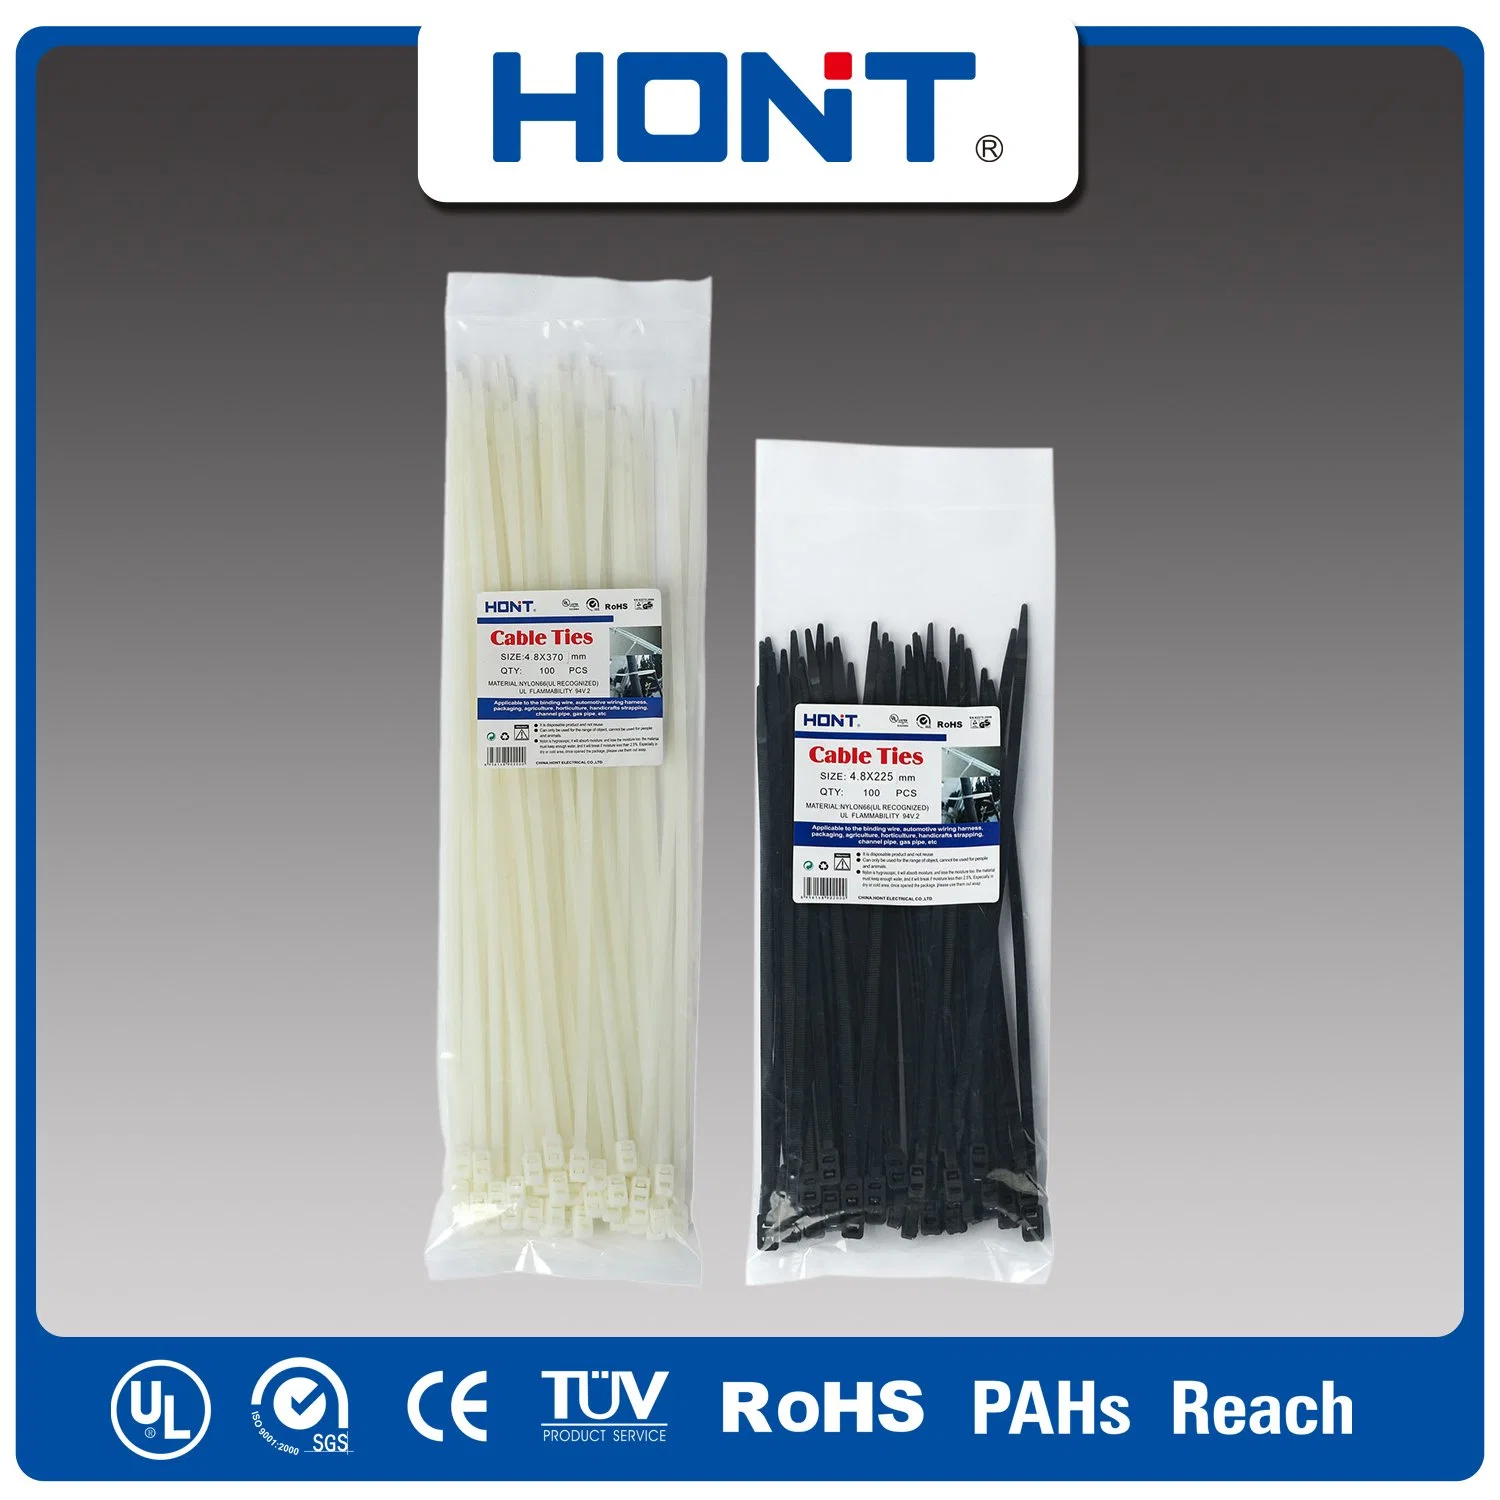 Nylon 66 ISO Approved Hont Plastic Bag + Sticker Exporting Carton/Tray Tie Bandex Cable Accessories